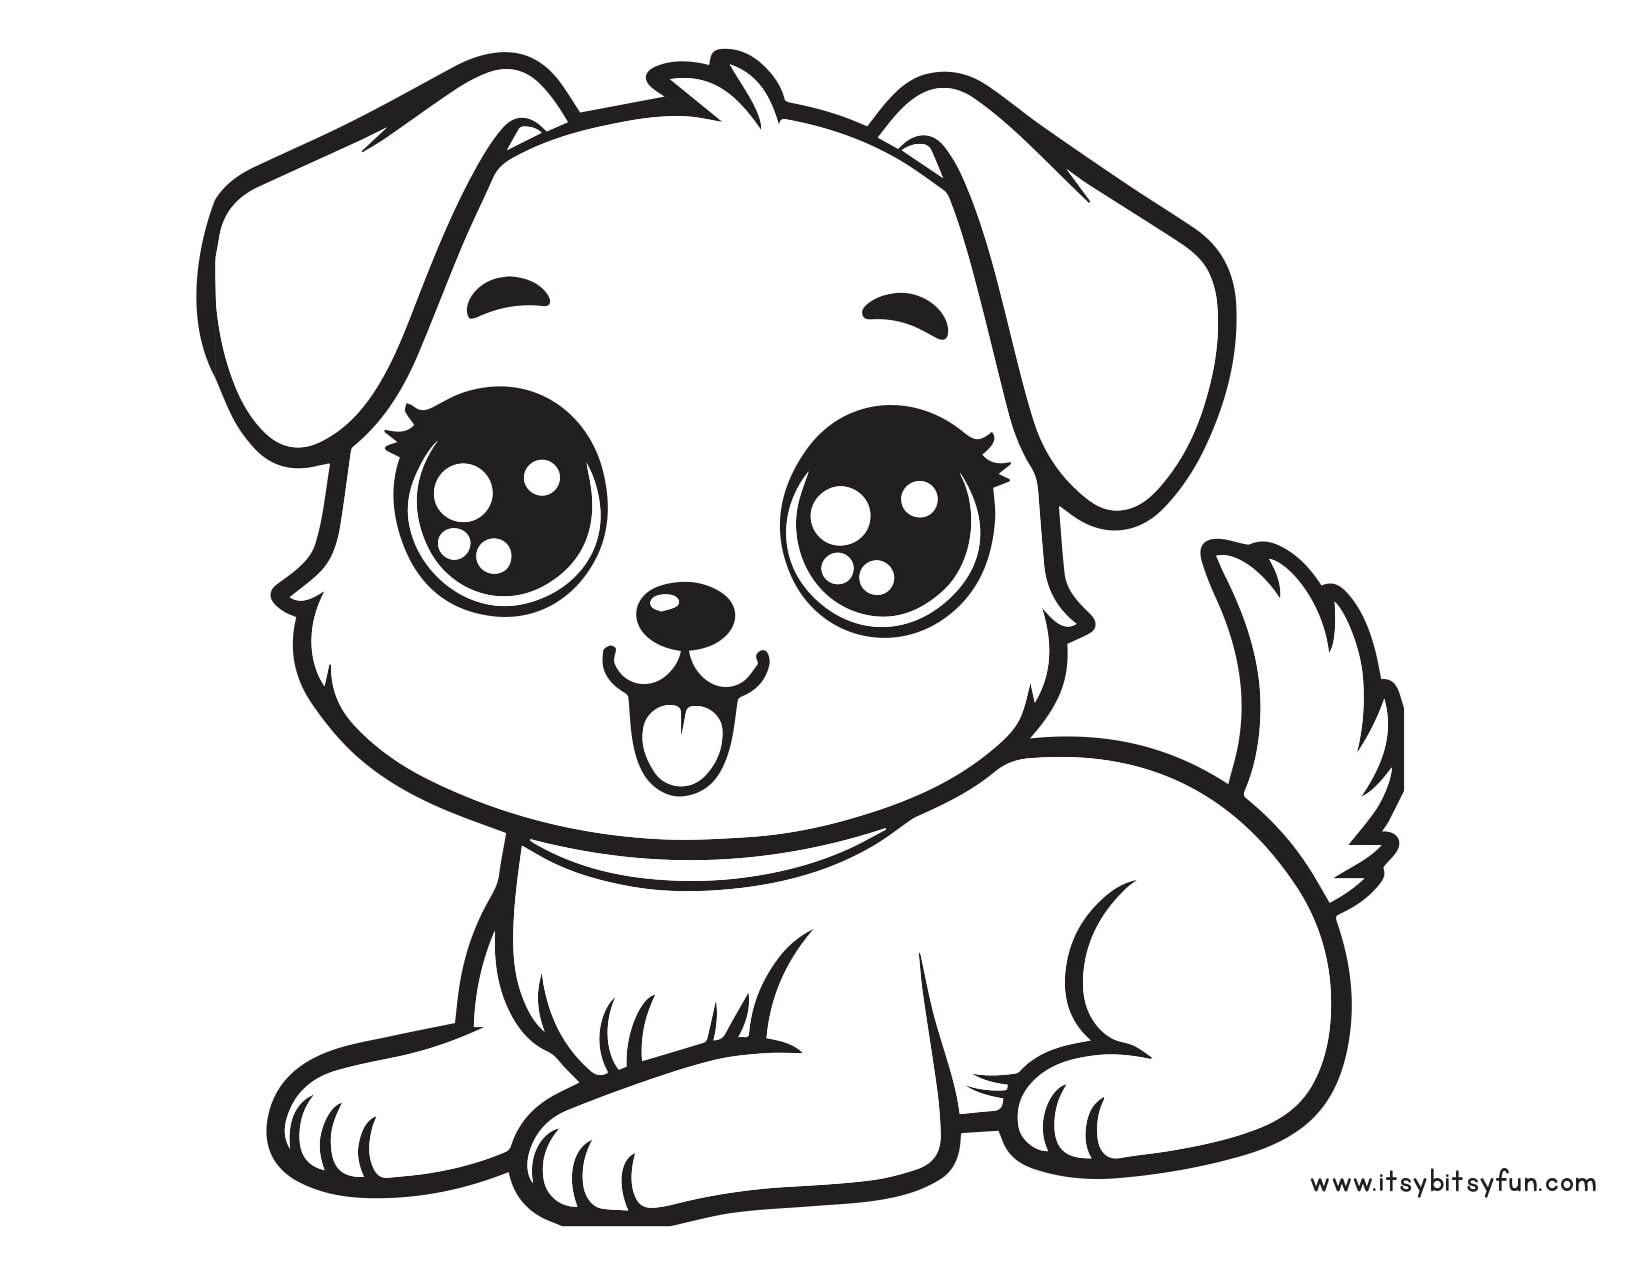 Easy dog coloring page.